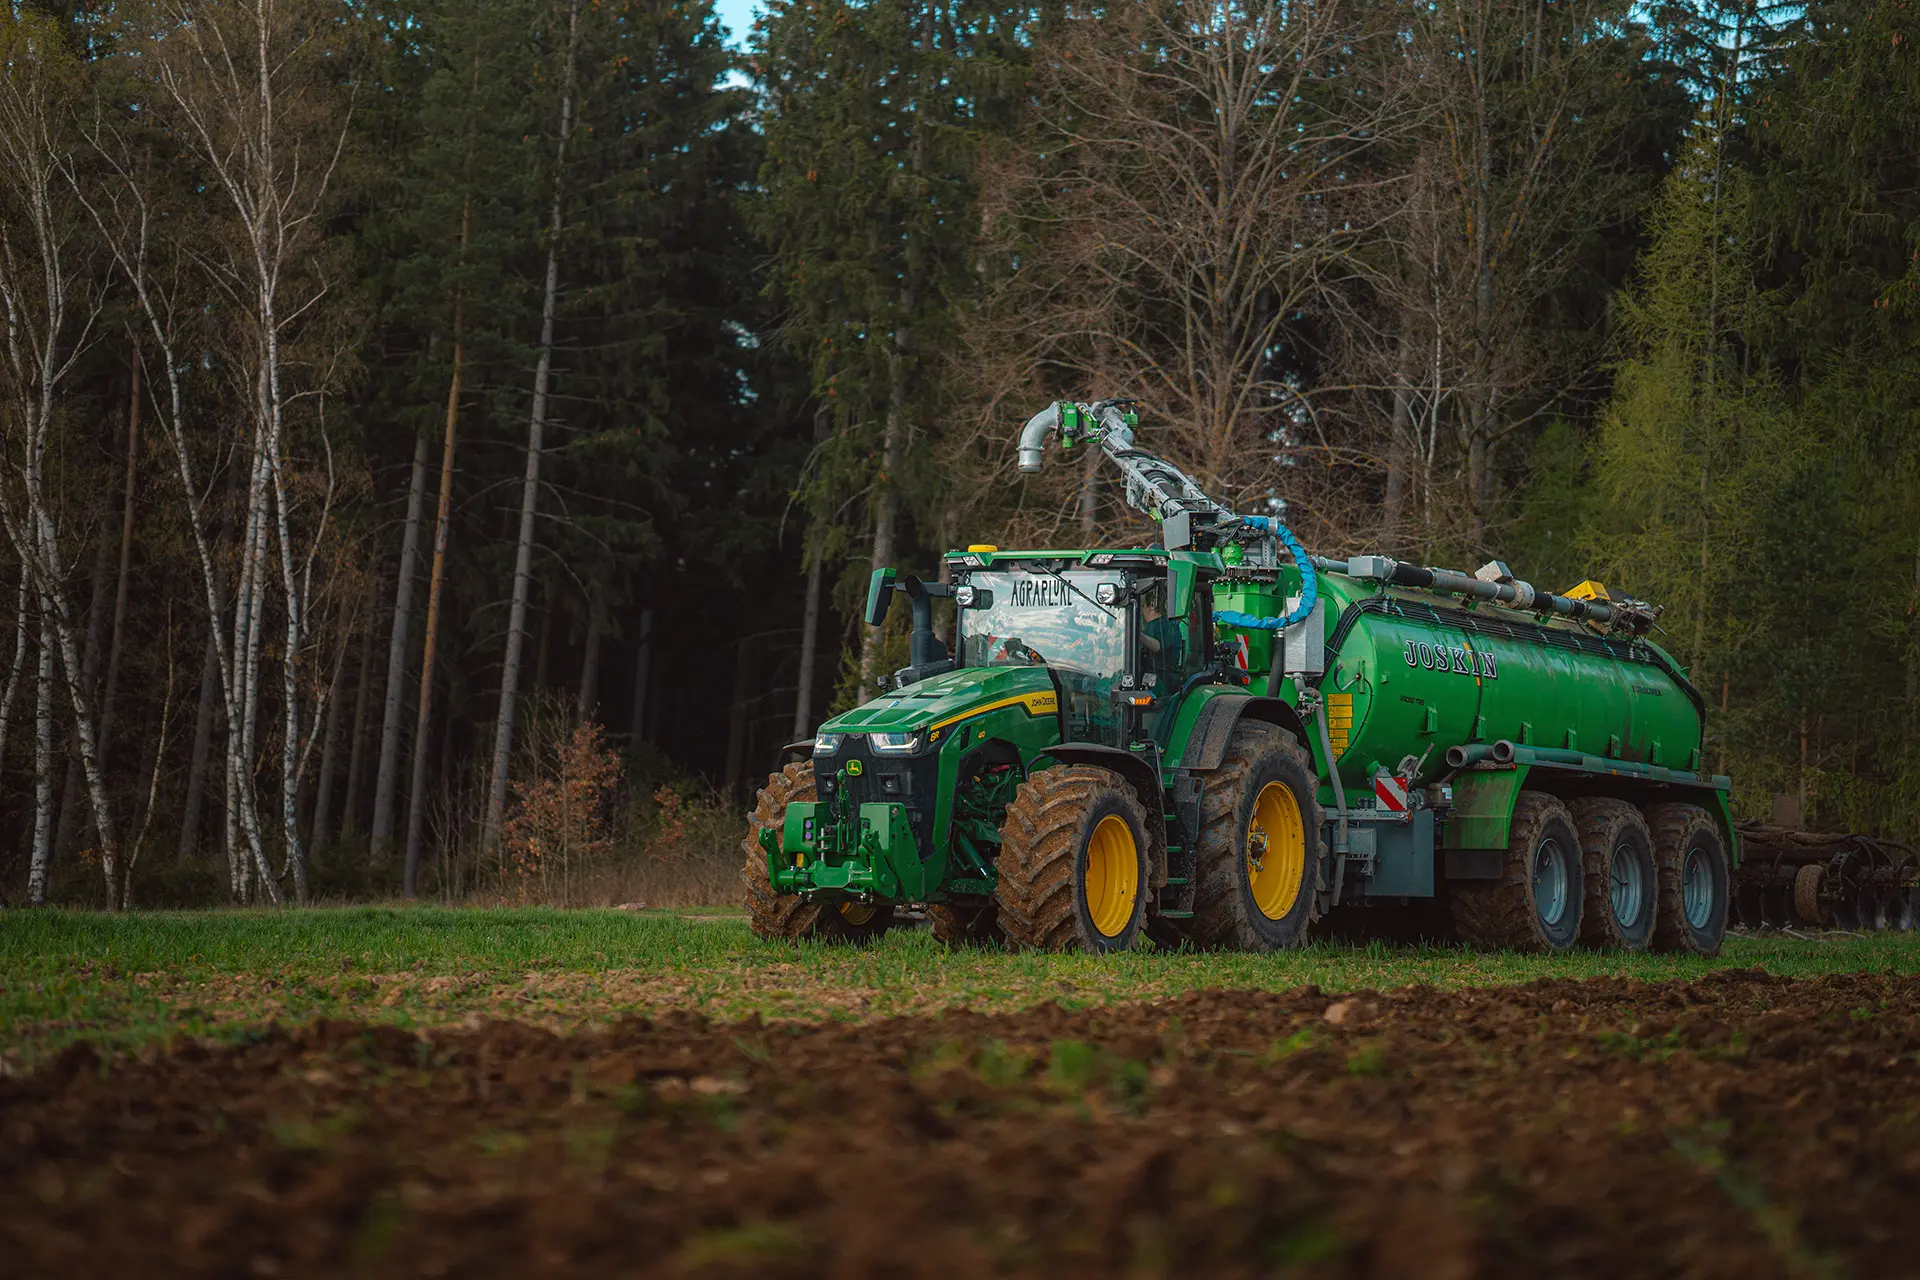 electric motors in off-highway applications such as the John Deere 8R eautopowr for electric power splitting